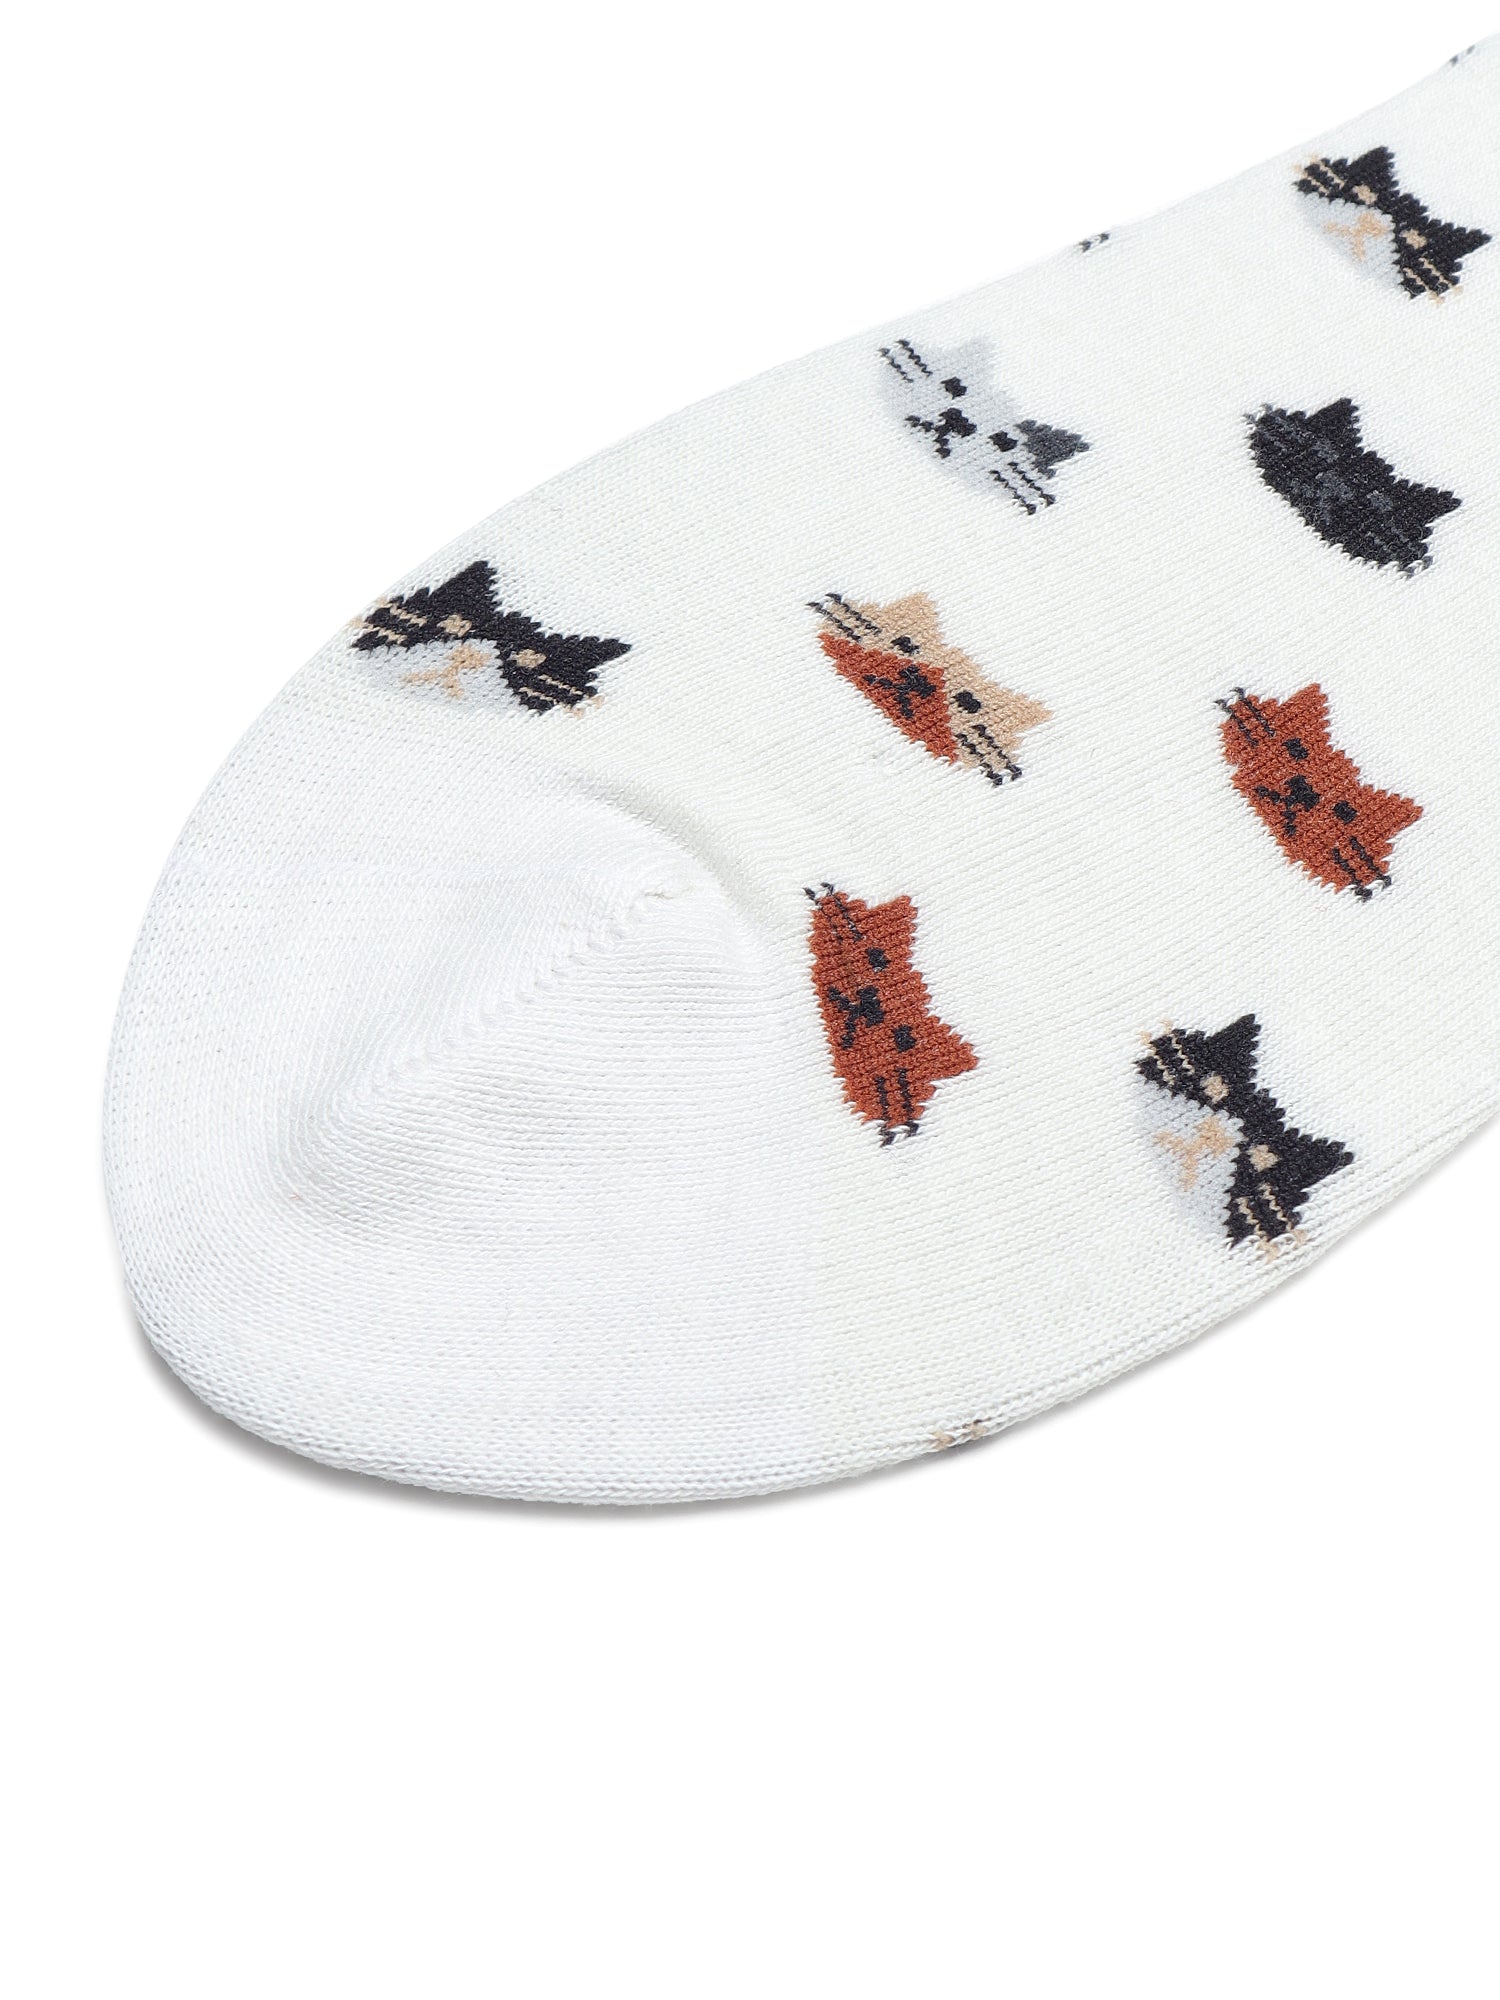 Purrfect | CreamAnkle Socks for Men and Women